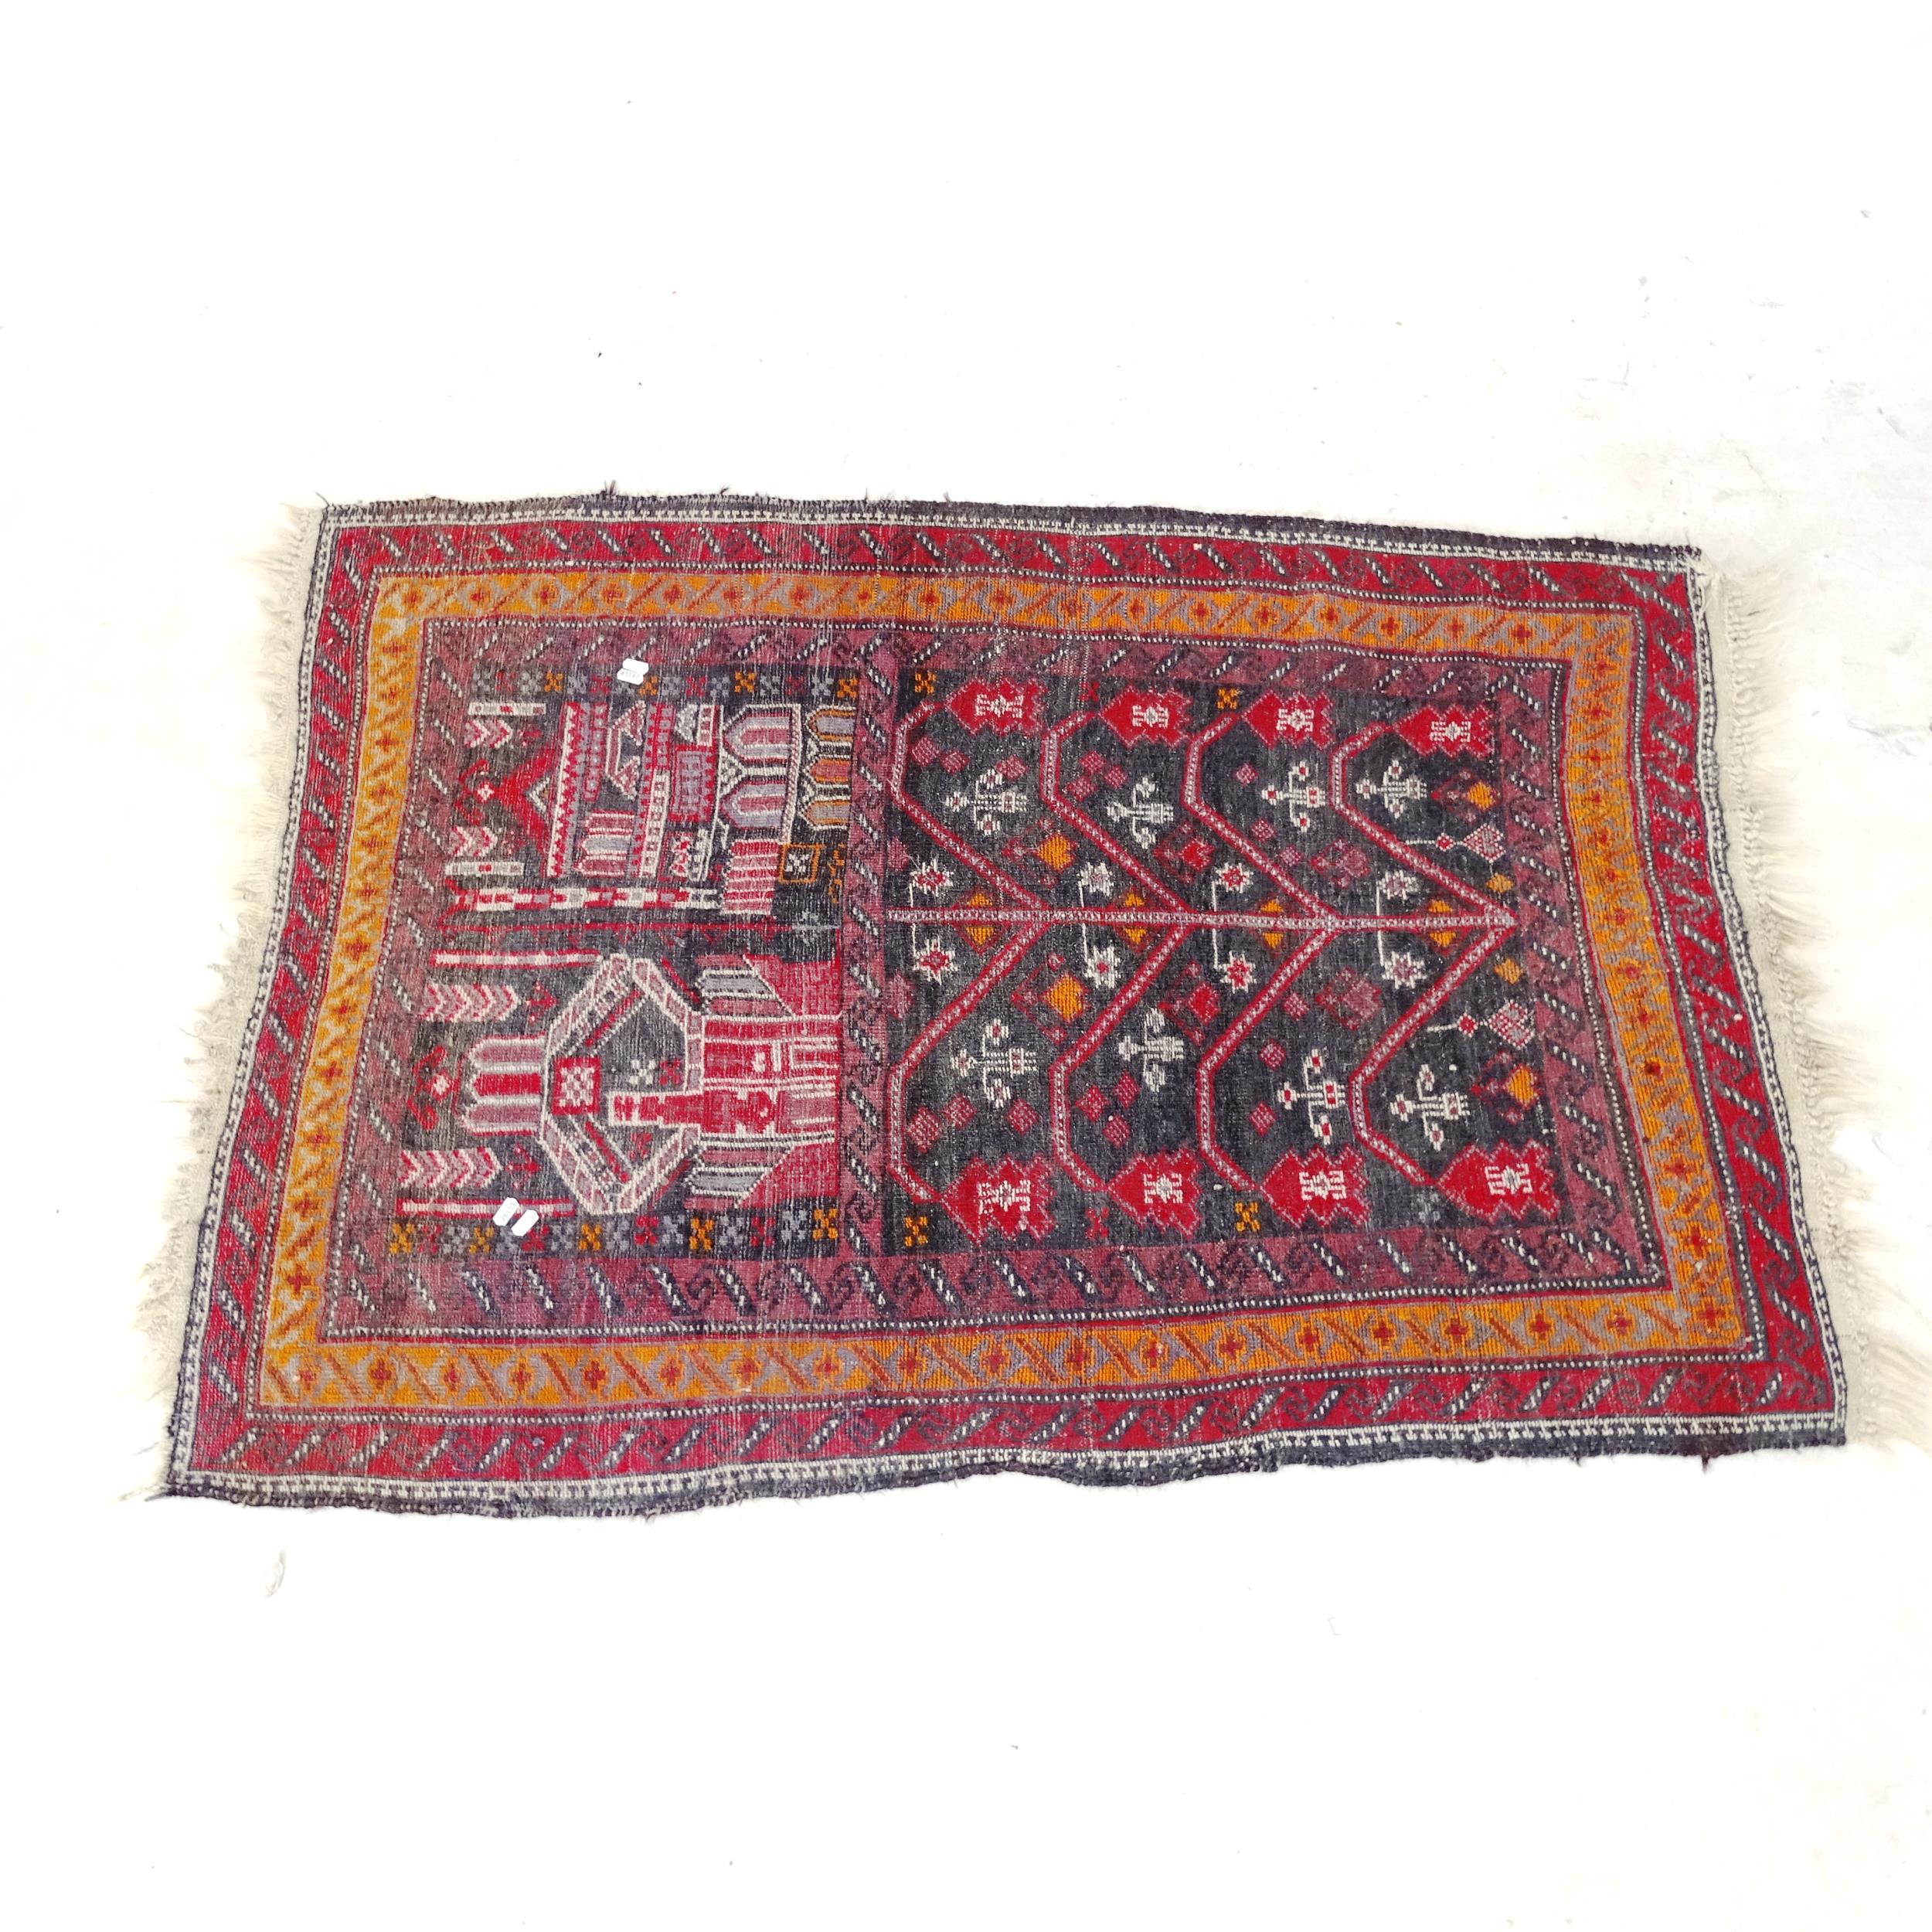 A red ground Persian rug, with tree design, 135cm x 100cm - Image 2 of 2